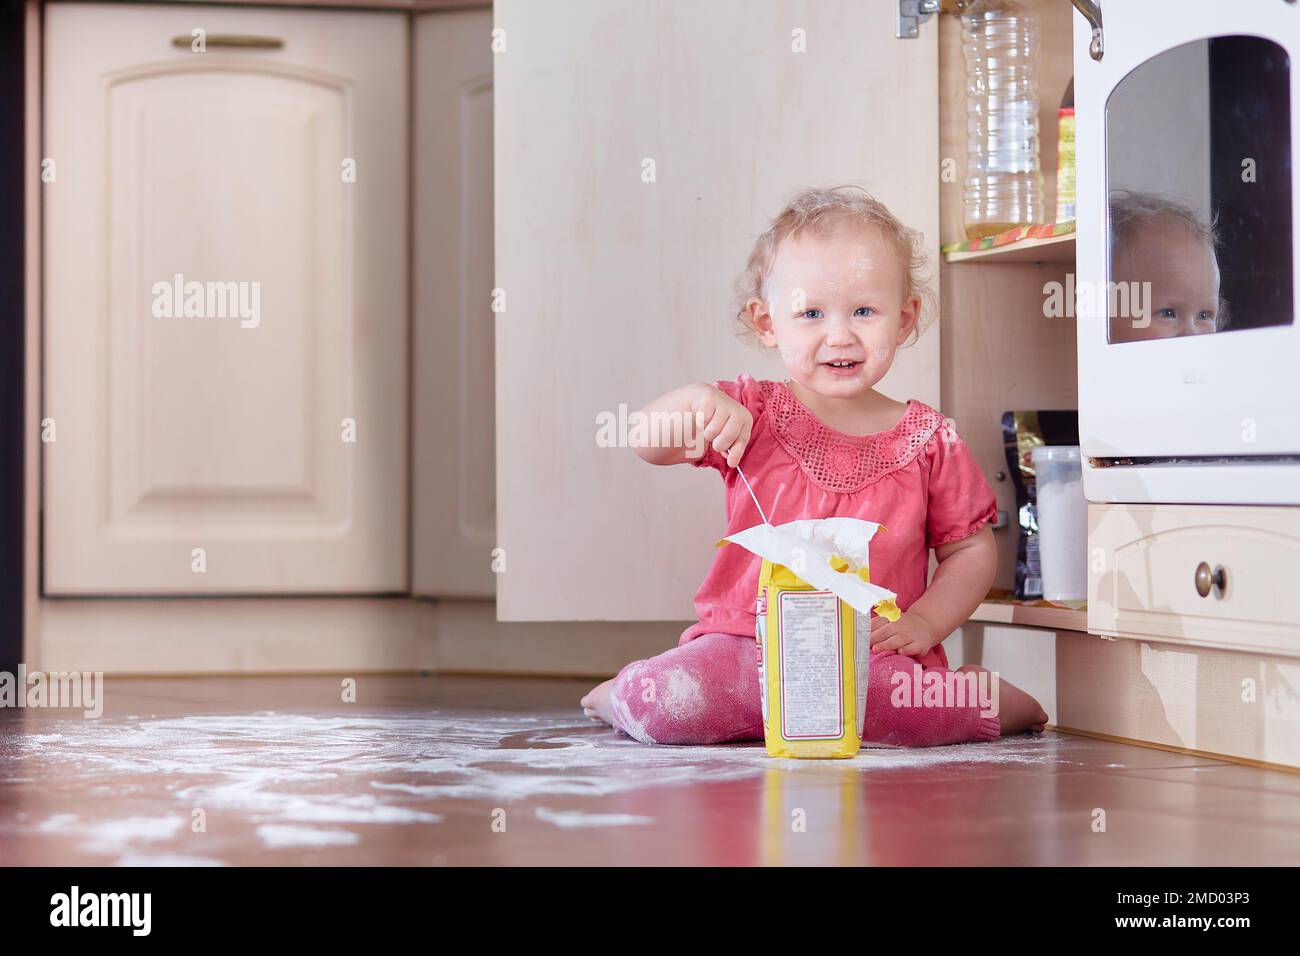 A child sits in a dirty heap of flour scattered on the floor in the kitchen at home. Copy space Stock Photo